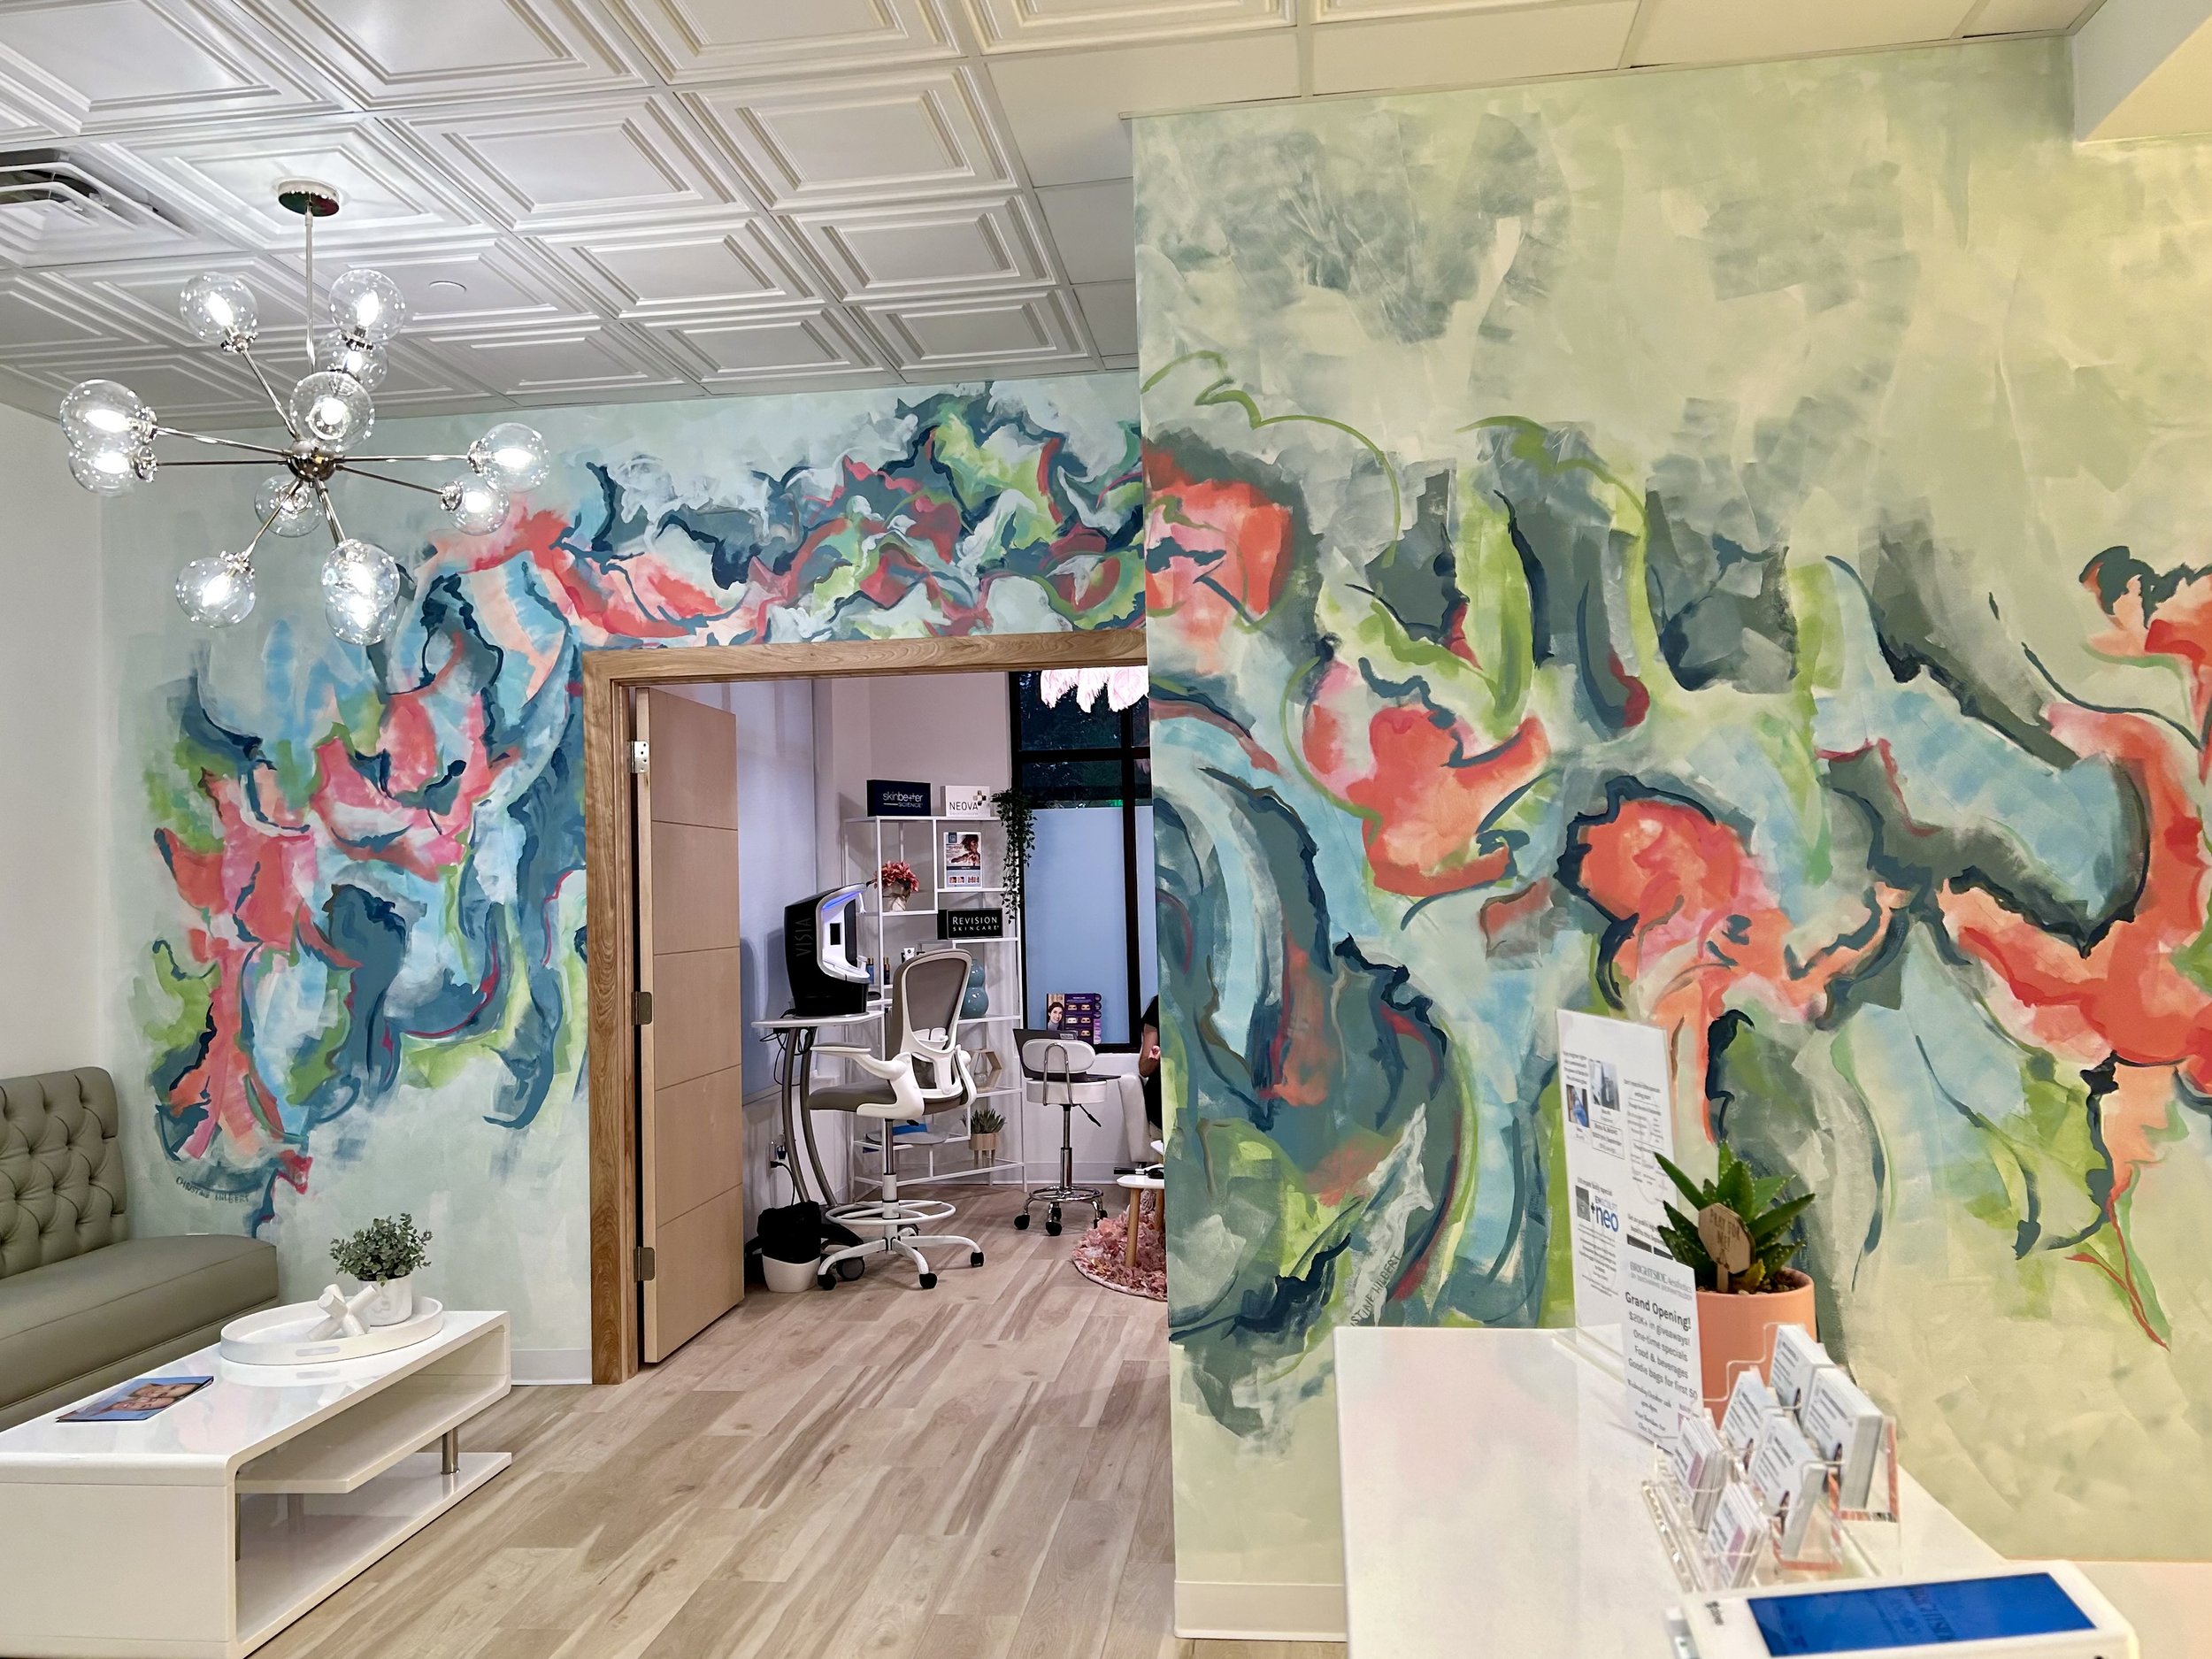 Reception area mural for Brightside Aesthetics by Ducharme Dermatology